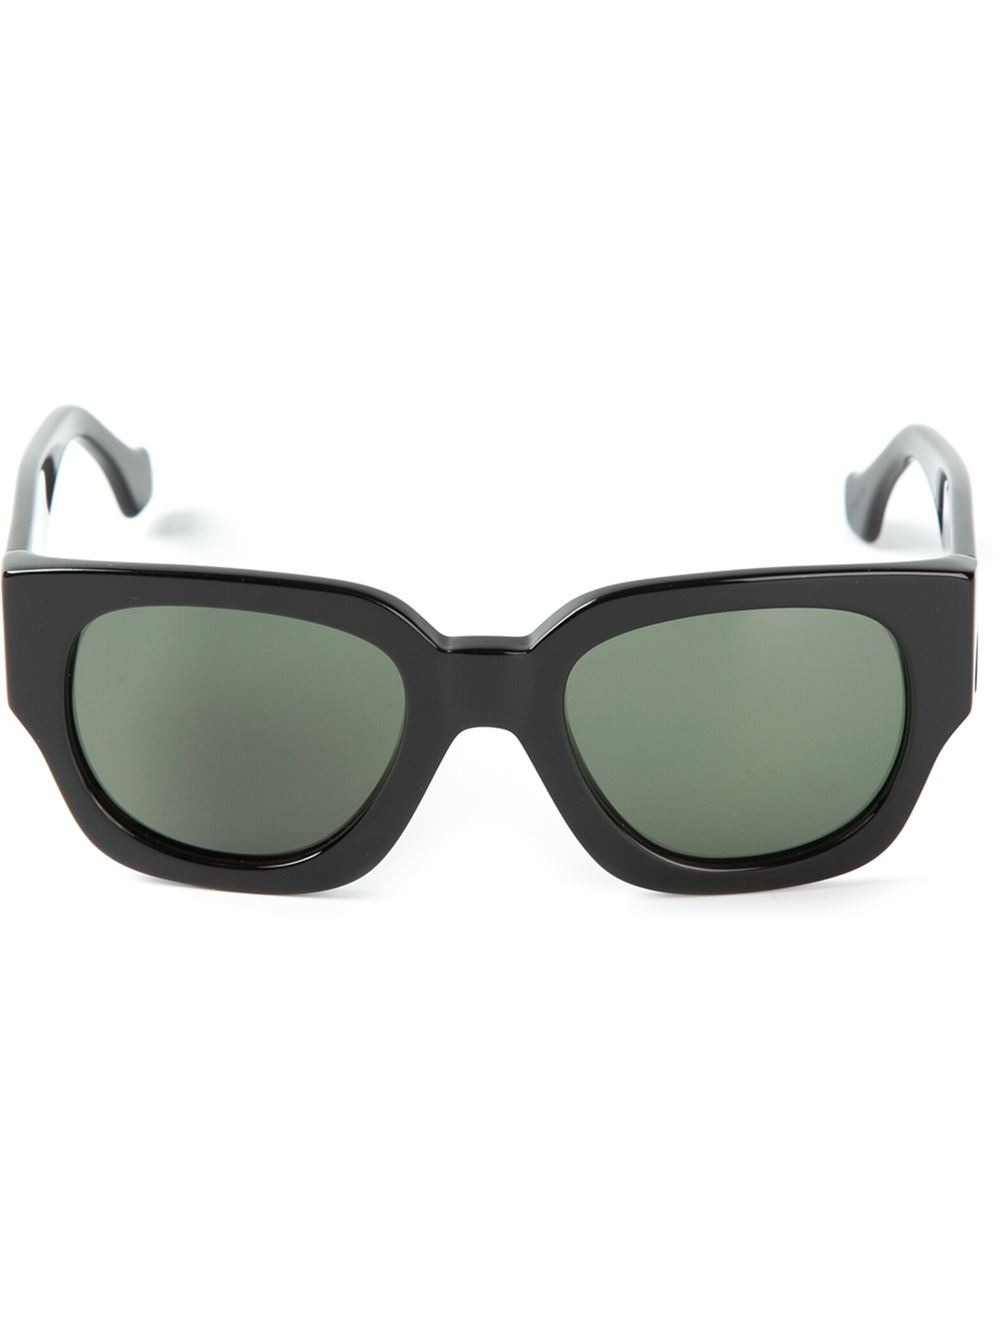 Balenciaga Thick D-Frame Sunglasses in Black for Men - Lyst